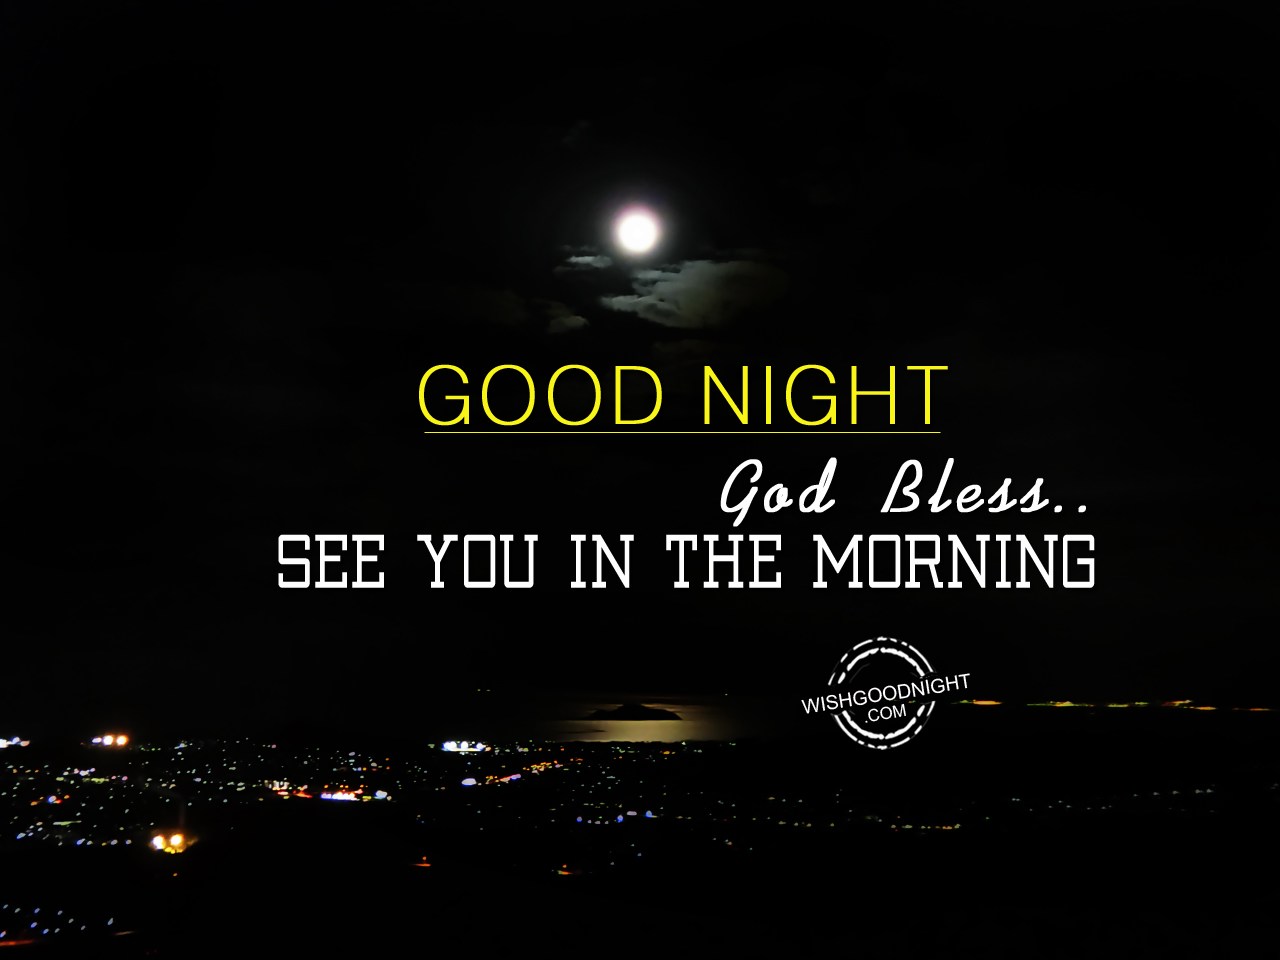 God Bless, See You In The Morning - Good Night Pictures – WishGoodNight.com